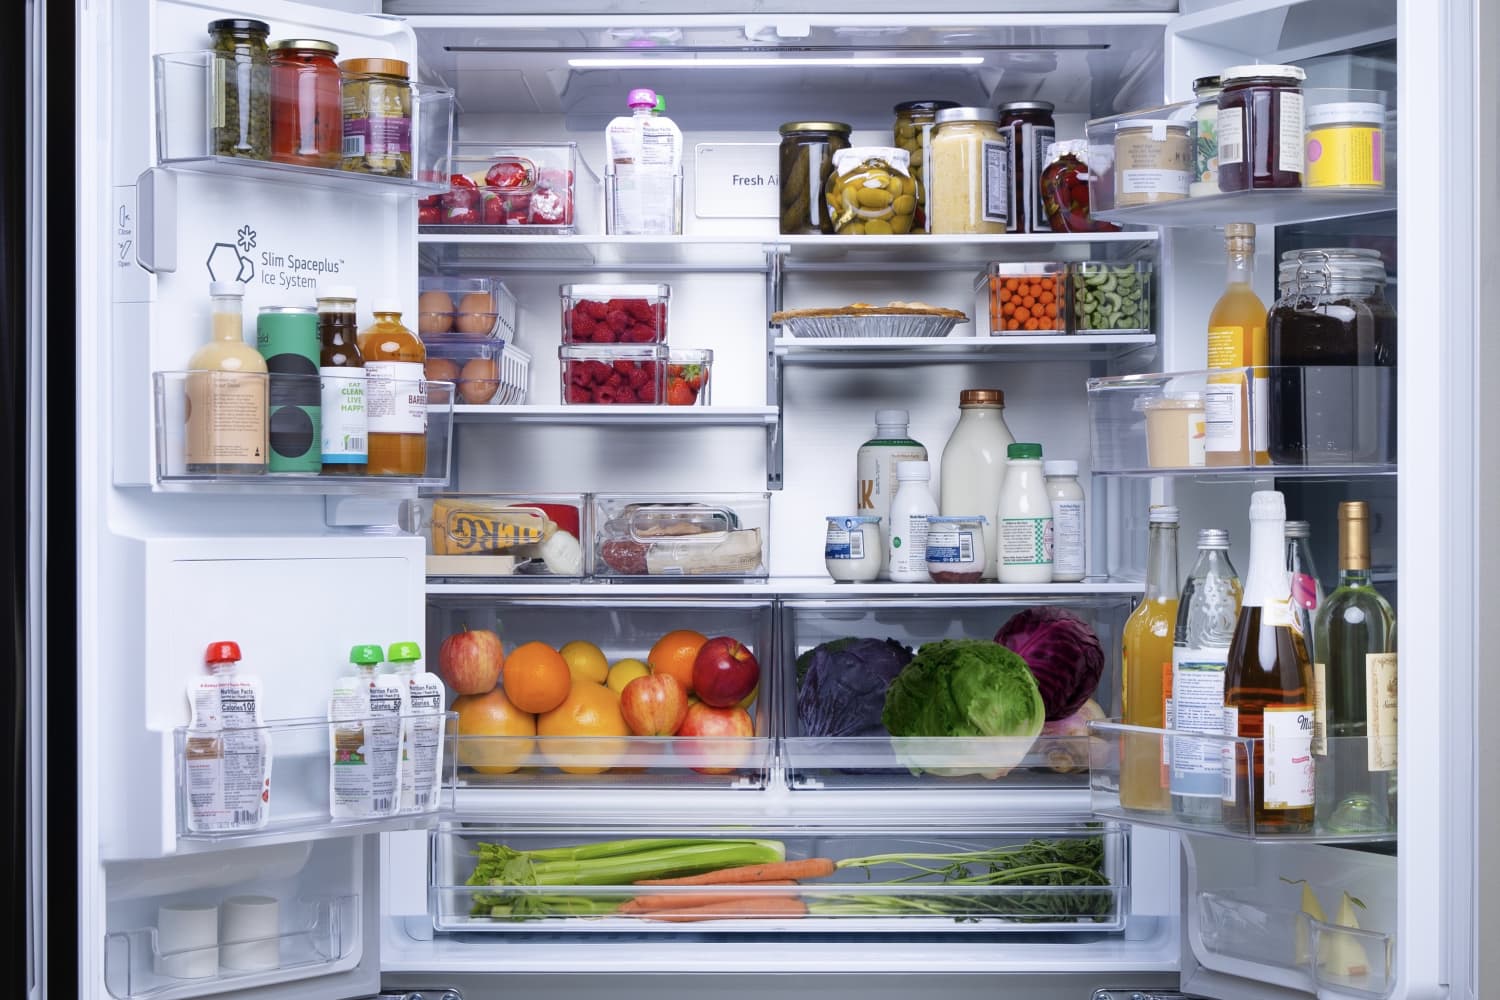 How to organize your refrigerator, according to an expert